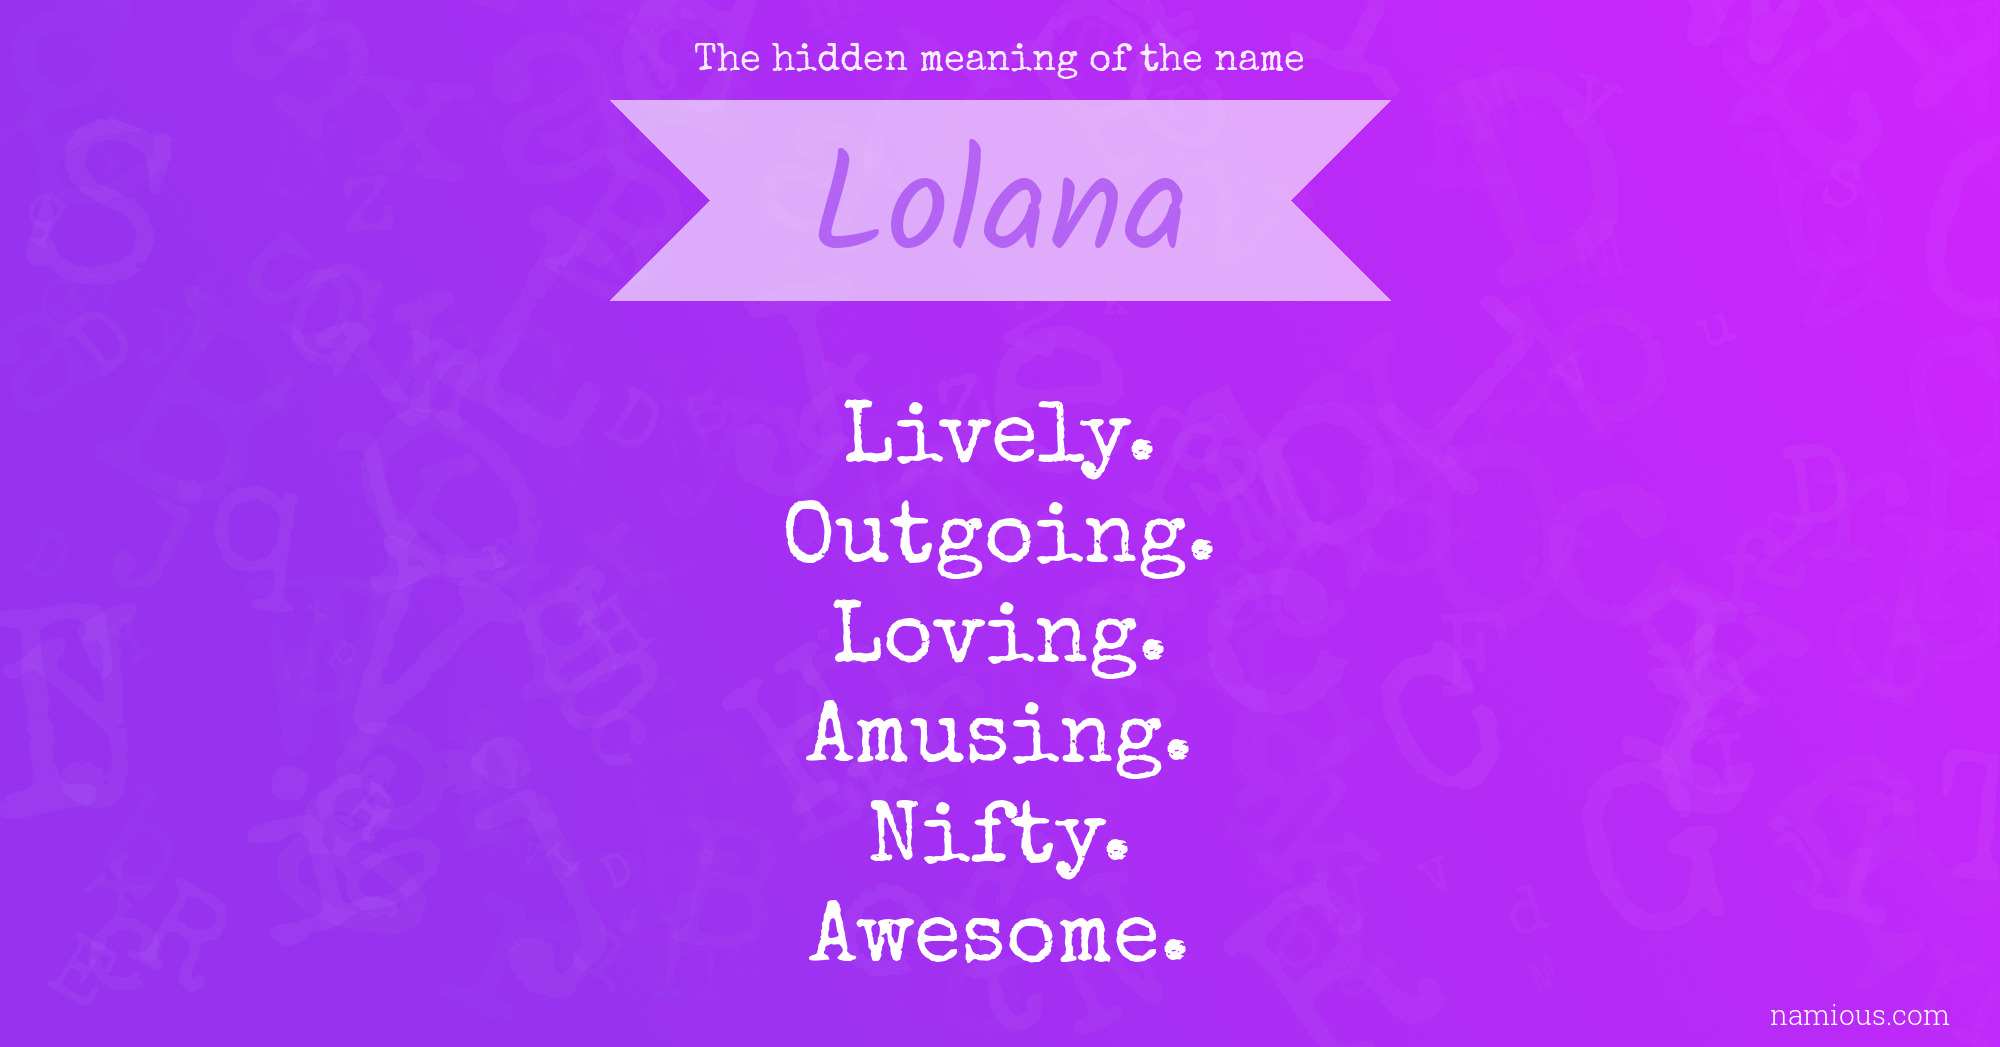 The hidden meaning of the name Lolana